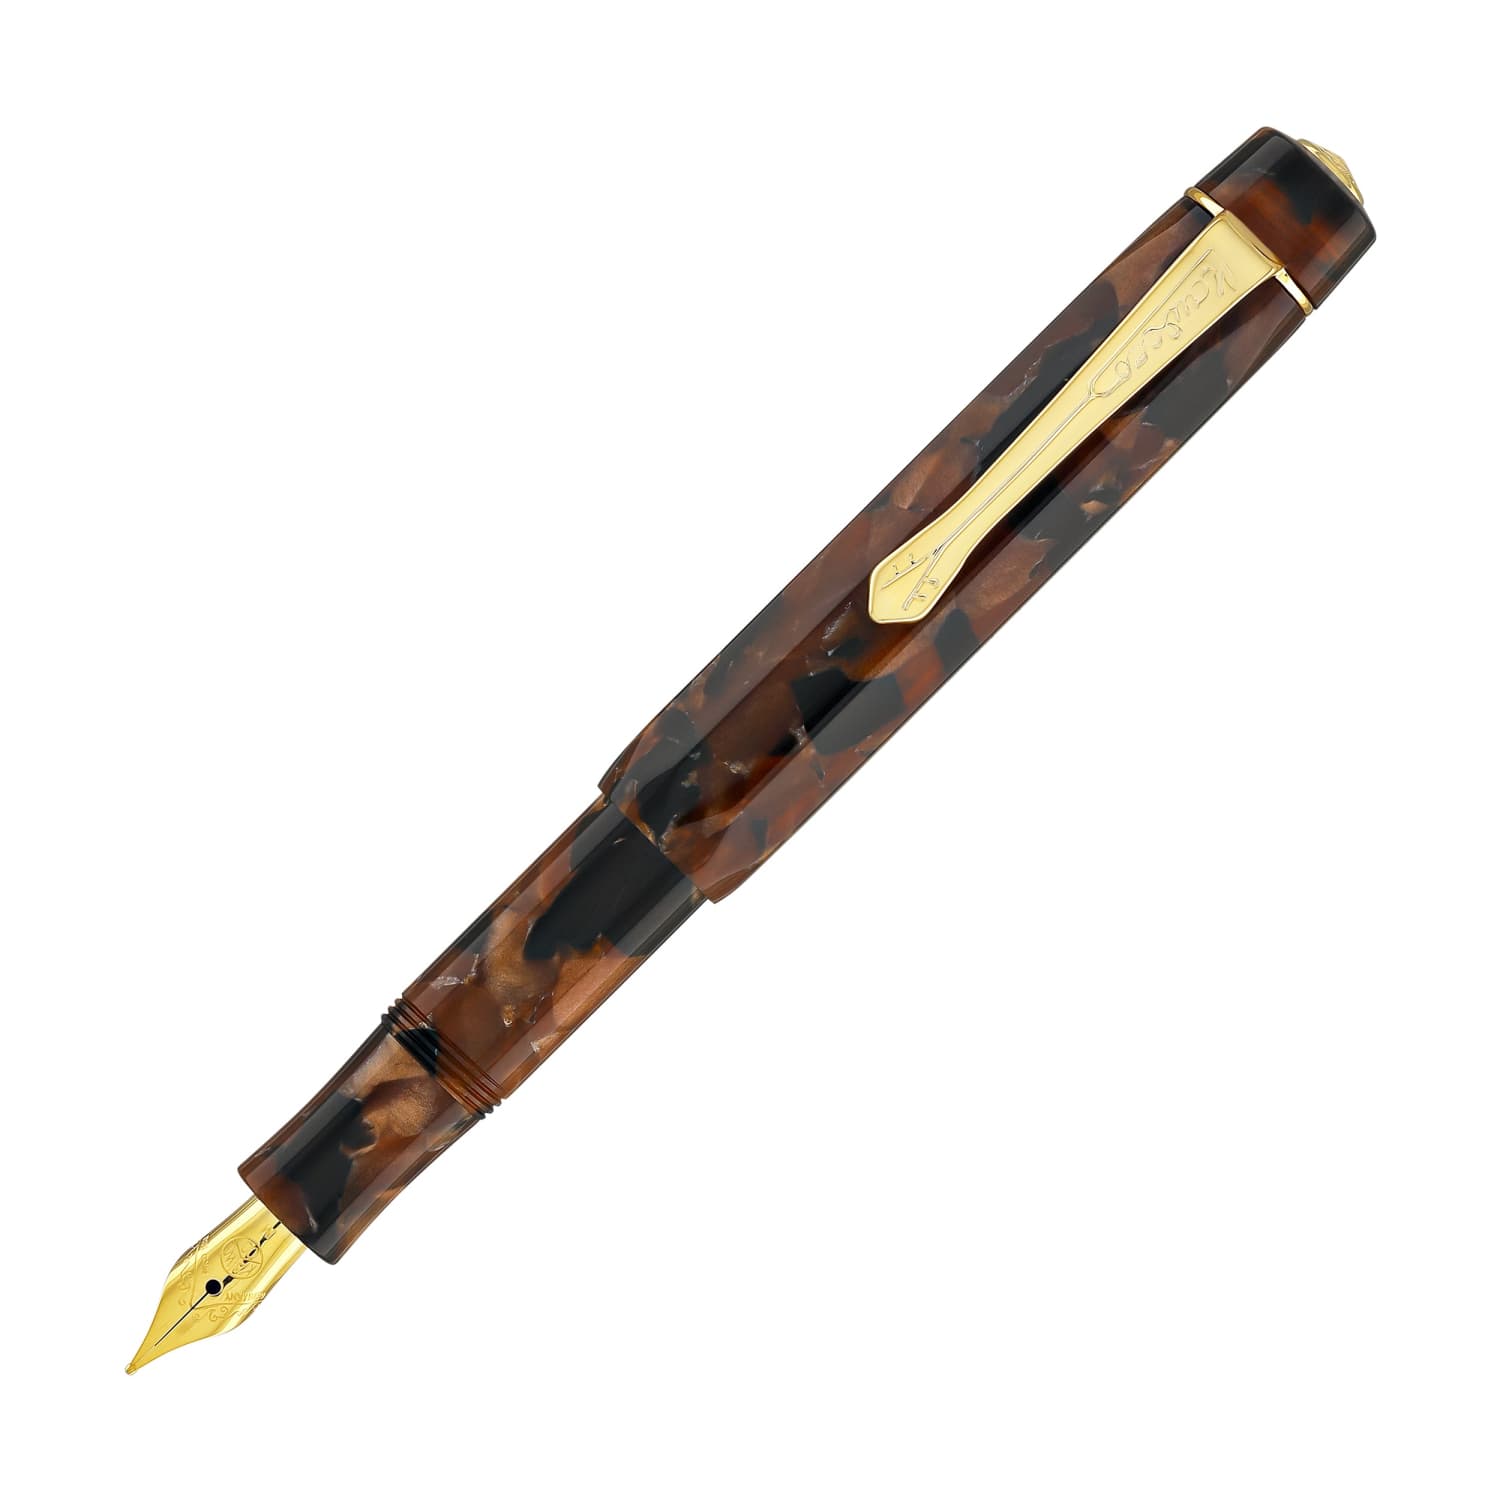 Kaweco ART Sport Fountain Pen in Hickory Brown